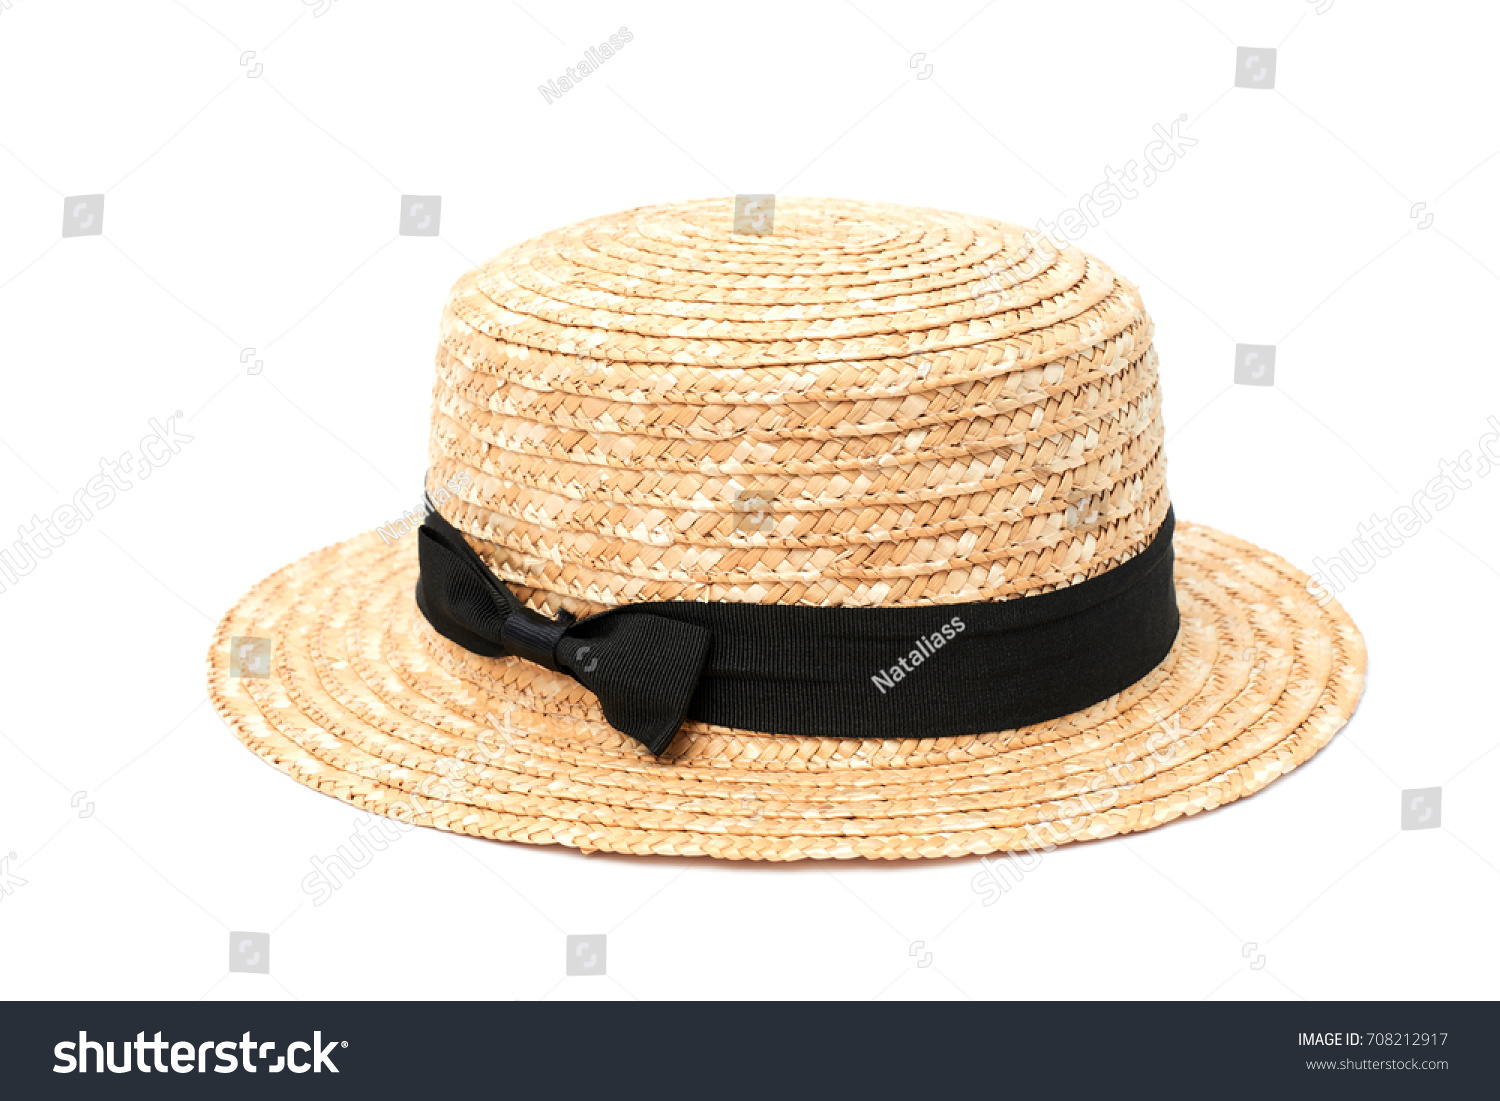 Boater straw hat isolated on white background #708212917